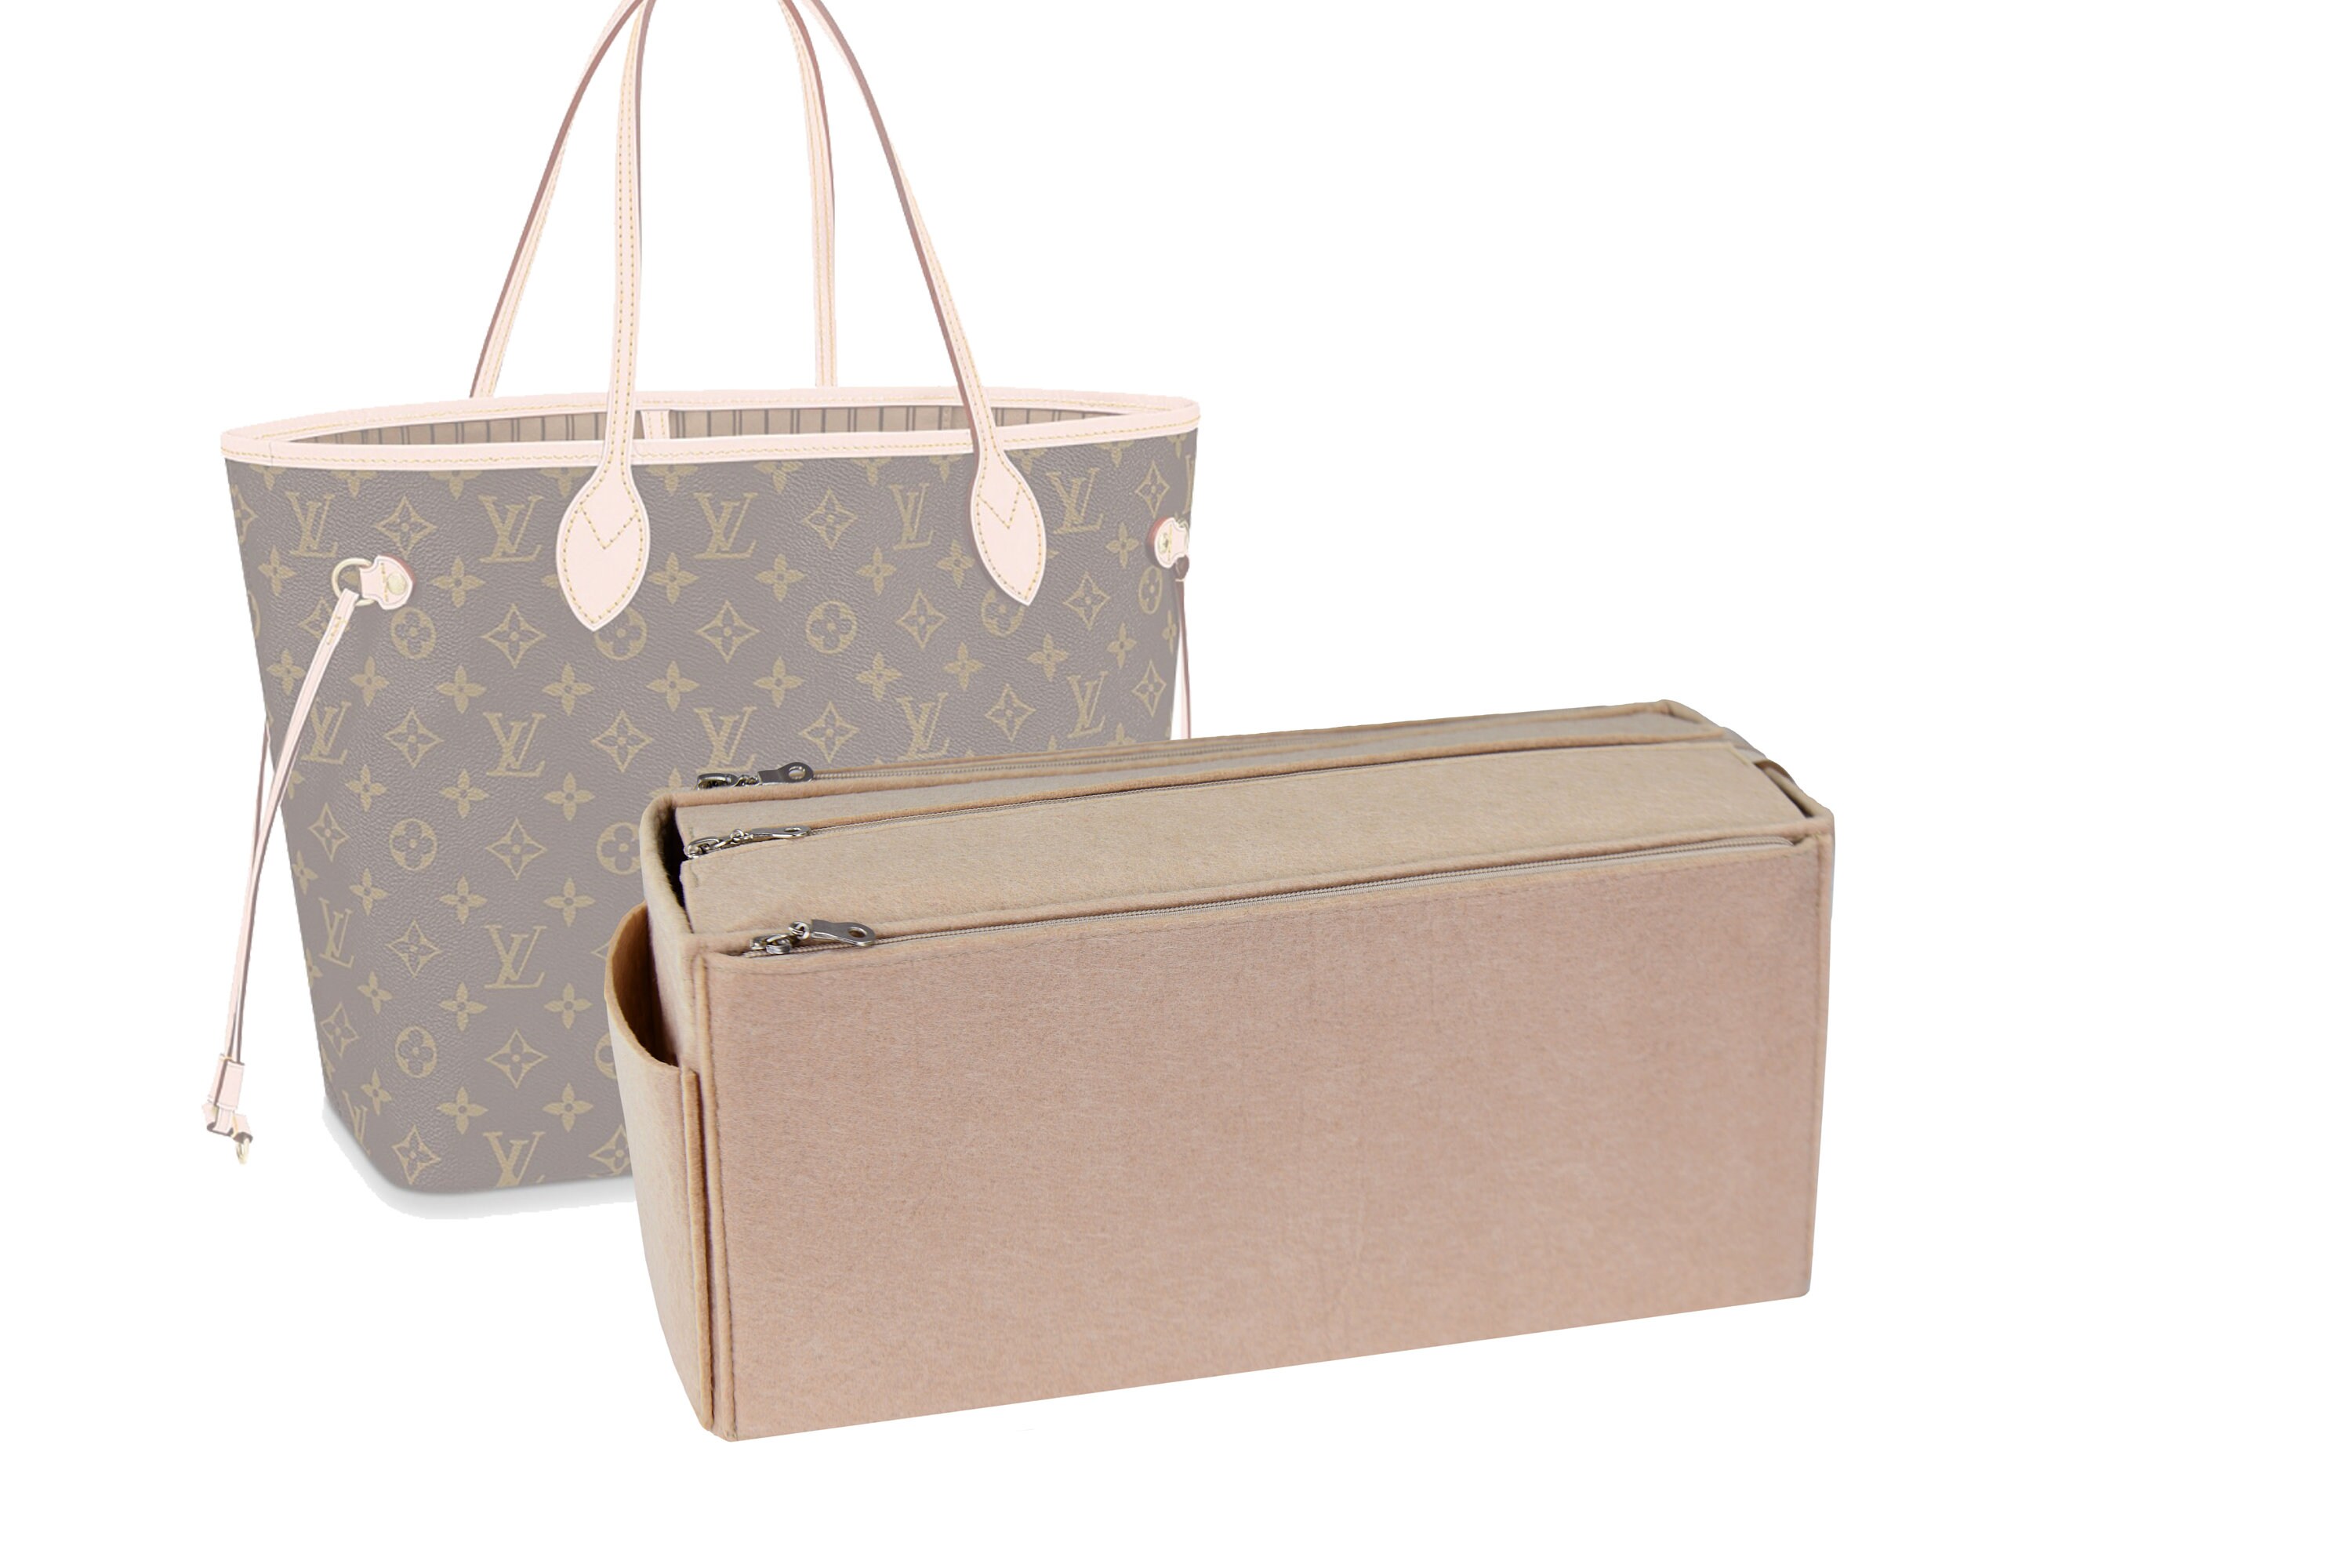 Buy Louis Vuitton Neverfull Mm Organizer Online In India -  India